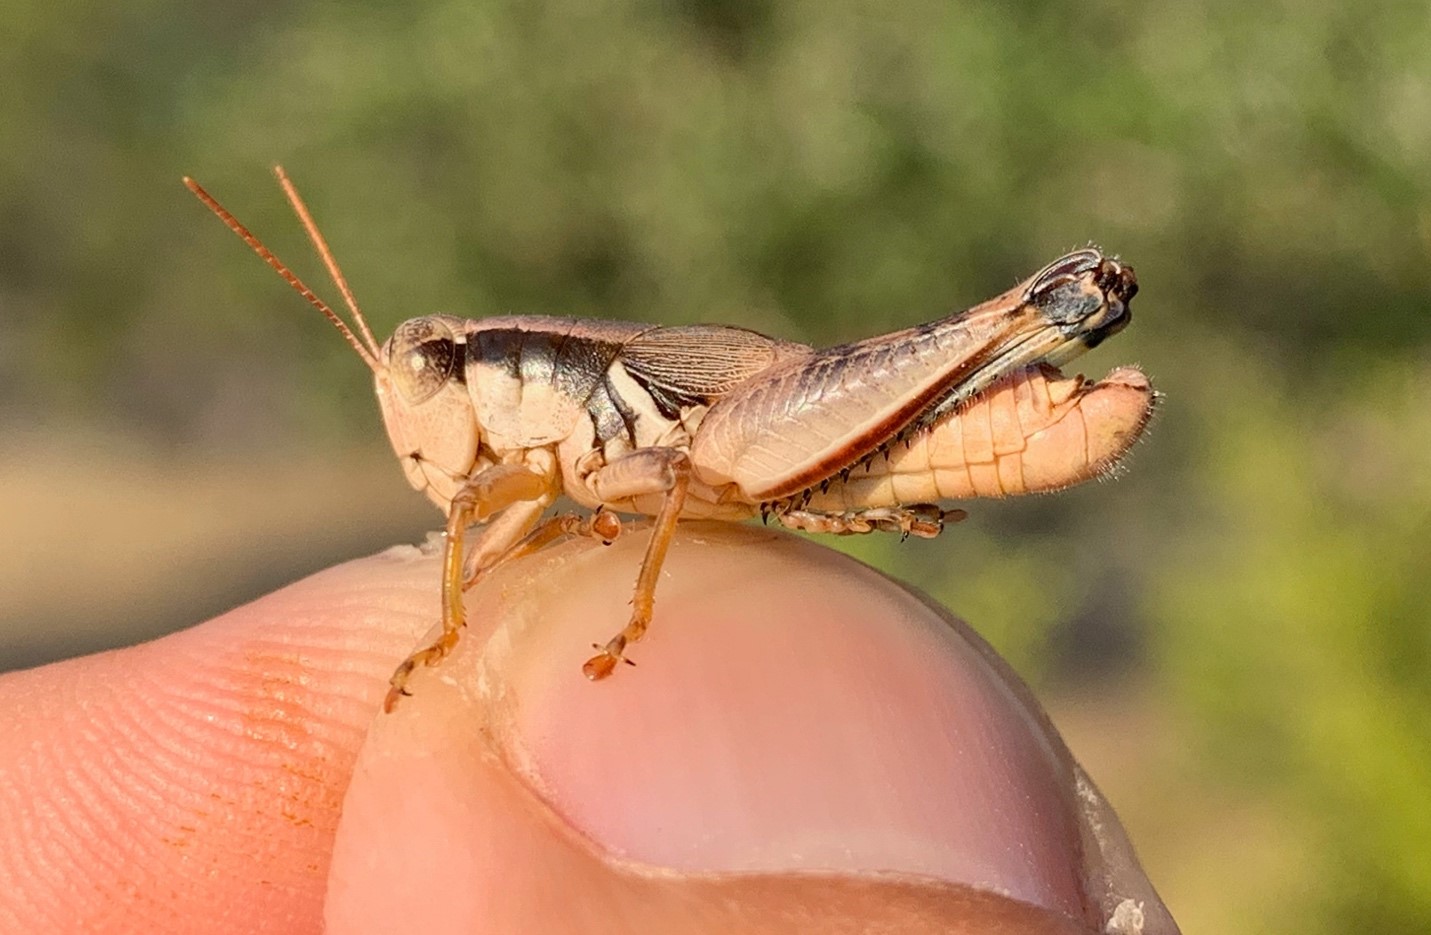 Melanoplus nelsoni named to recognize Willie Nelson, country music legend.